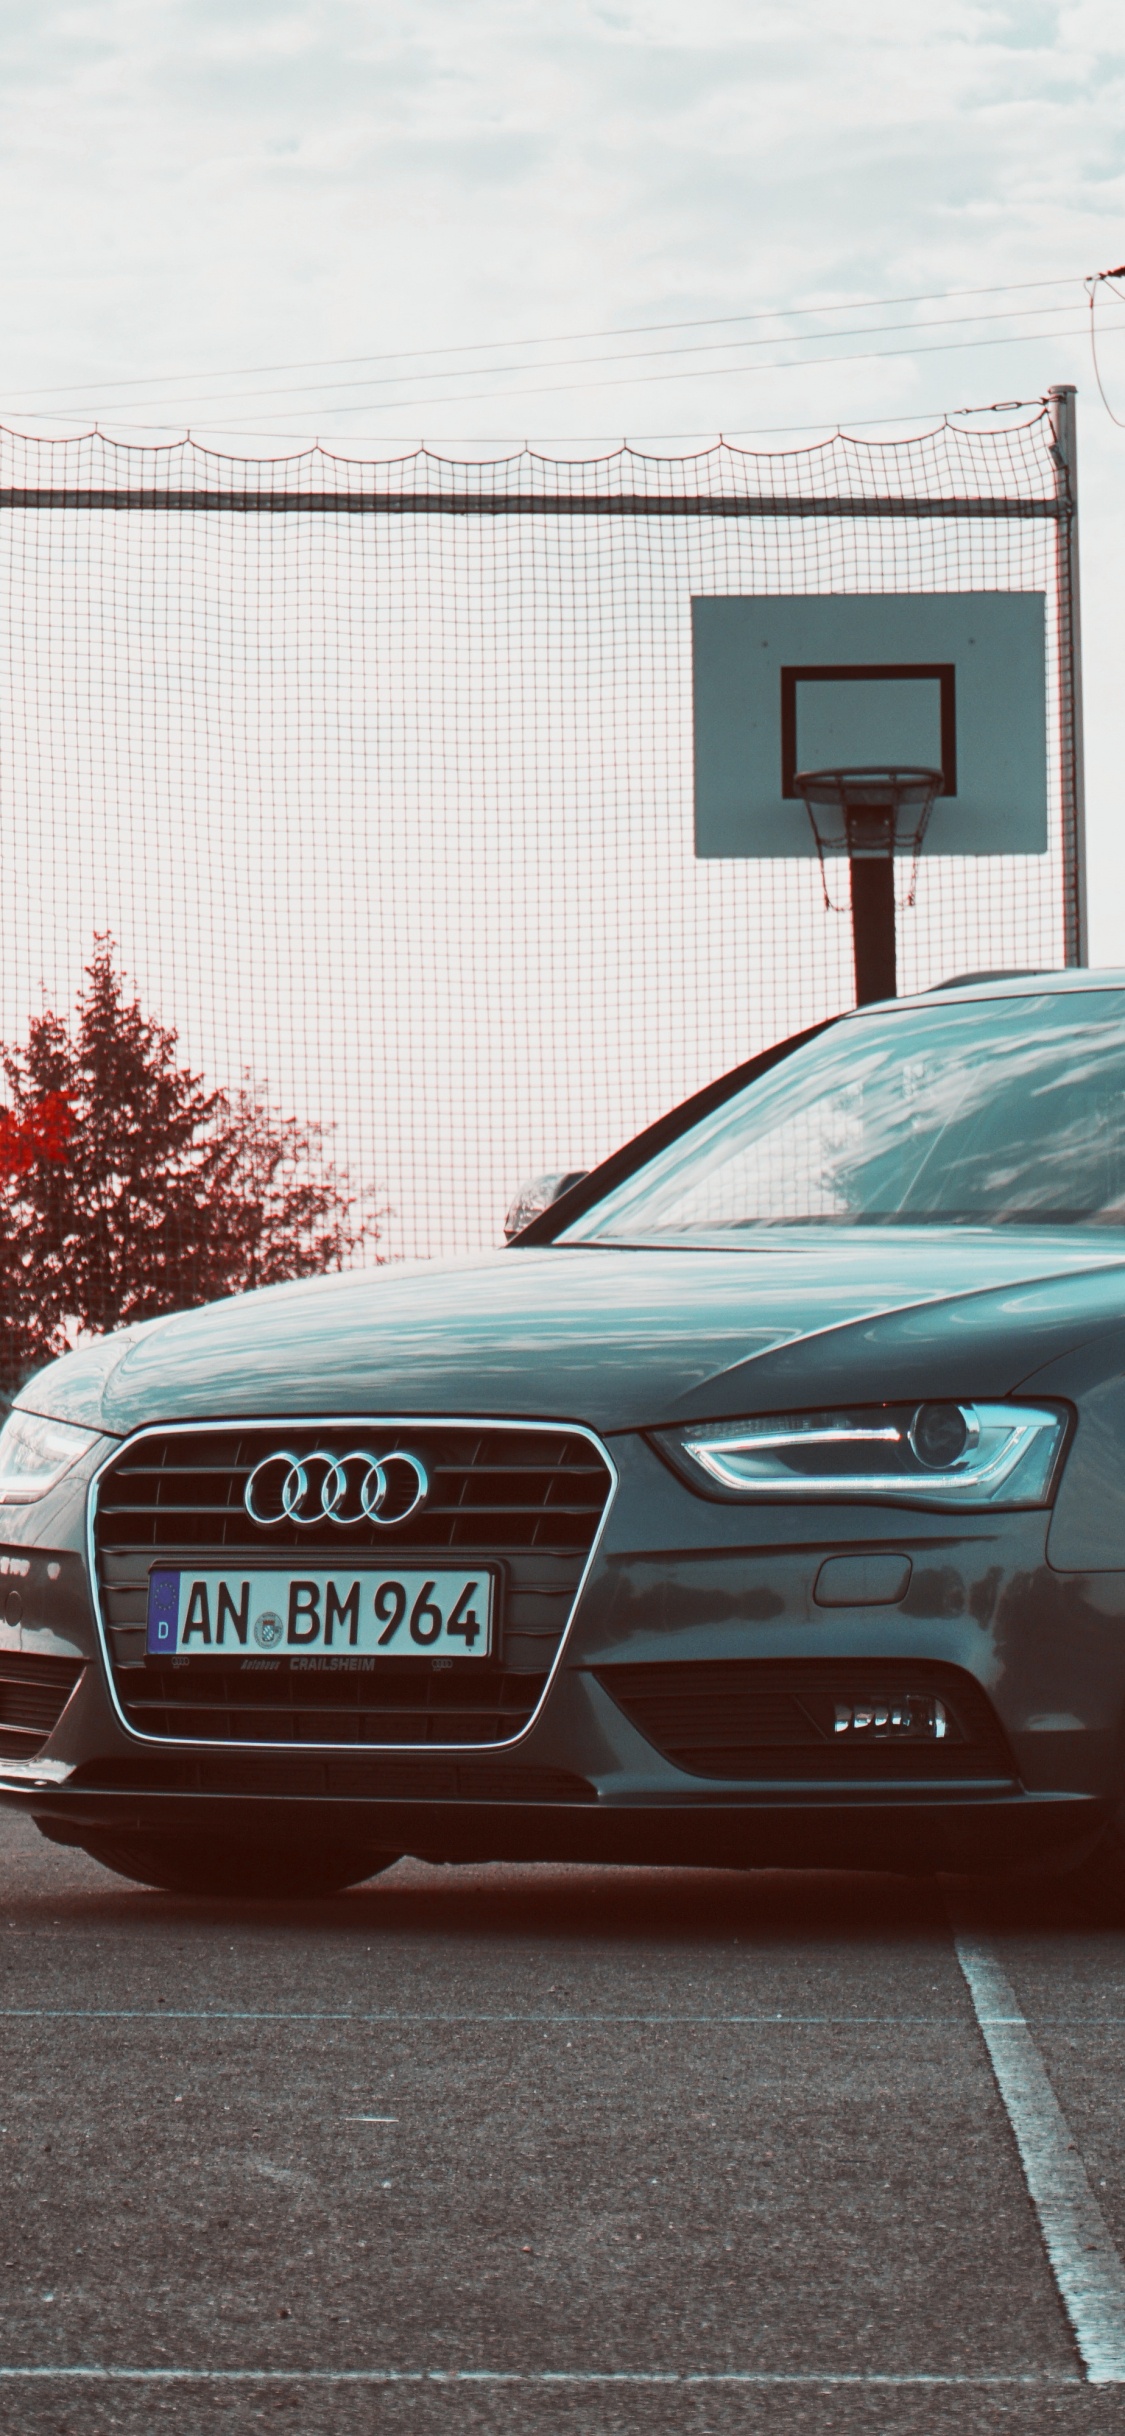 Black Audi Sedan Parked on Gray Concrete Road During Daytime. Wallpaper in 1125x2436 Resolution